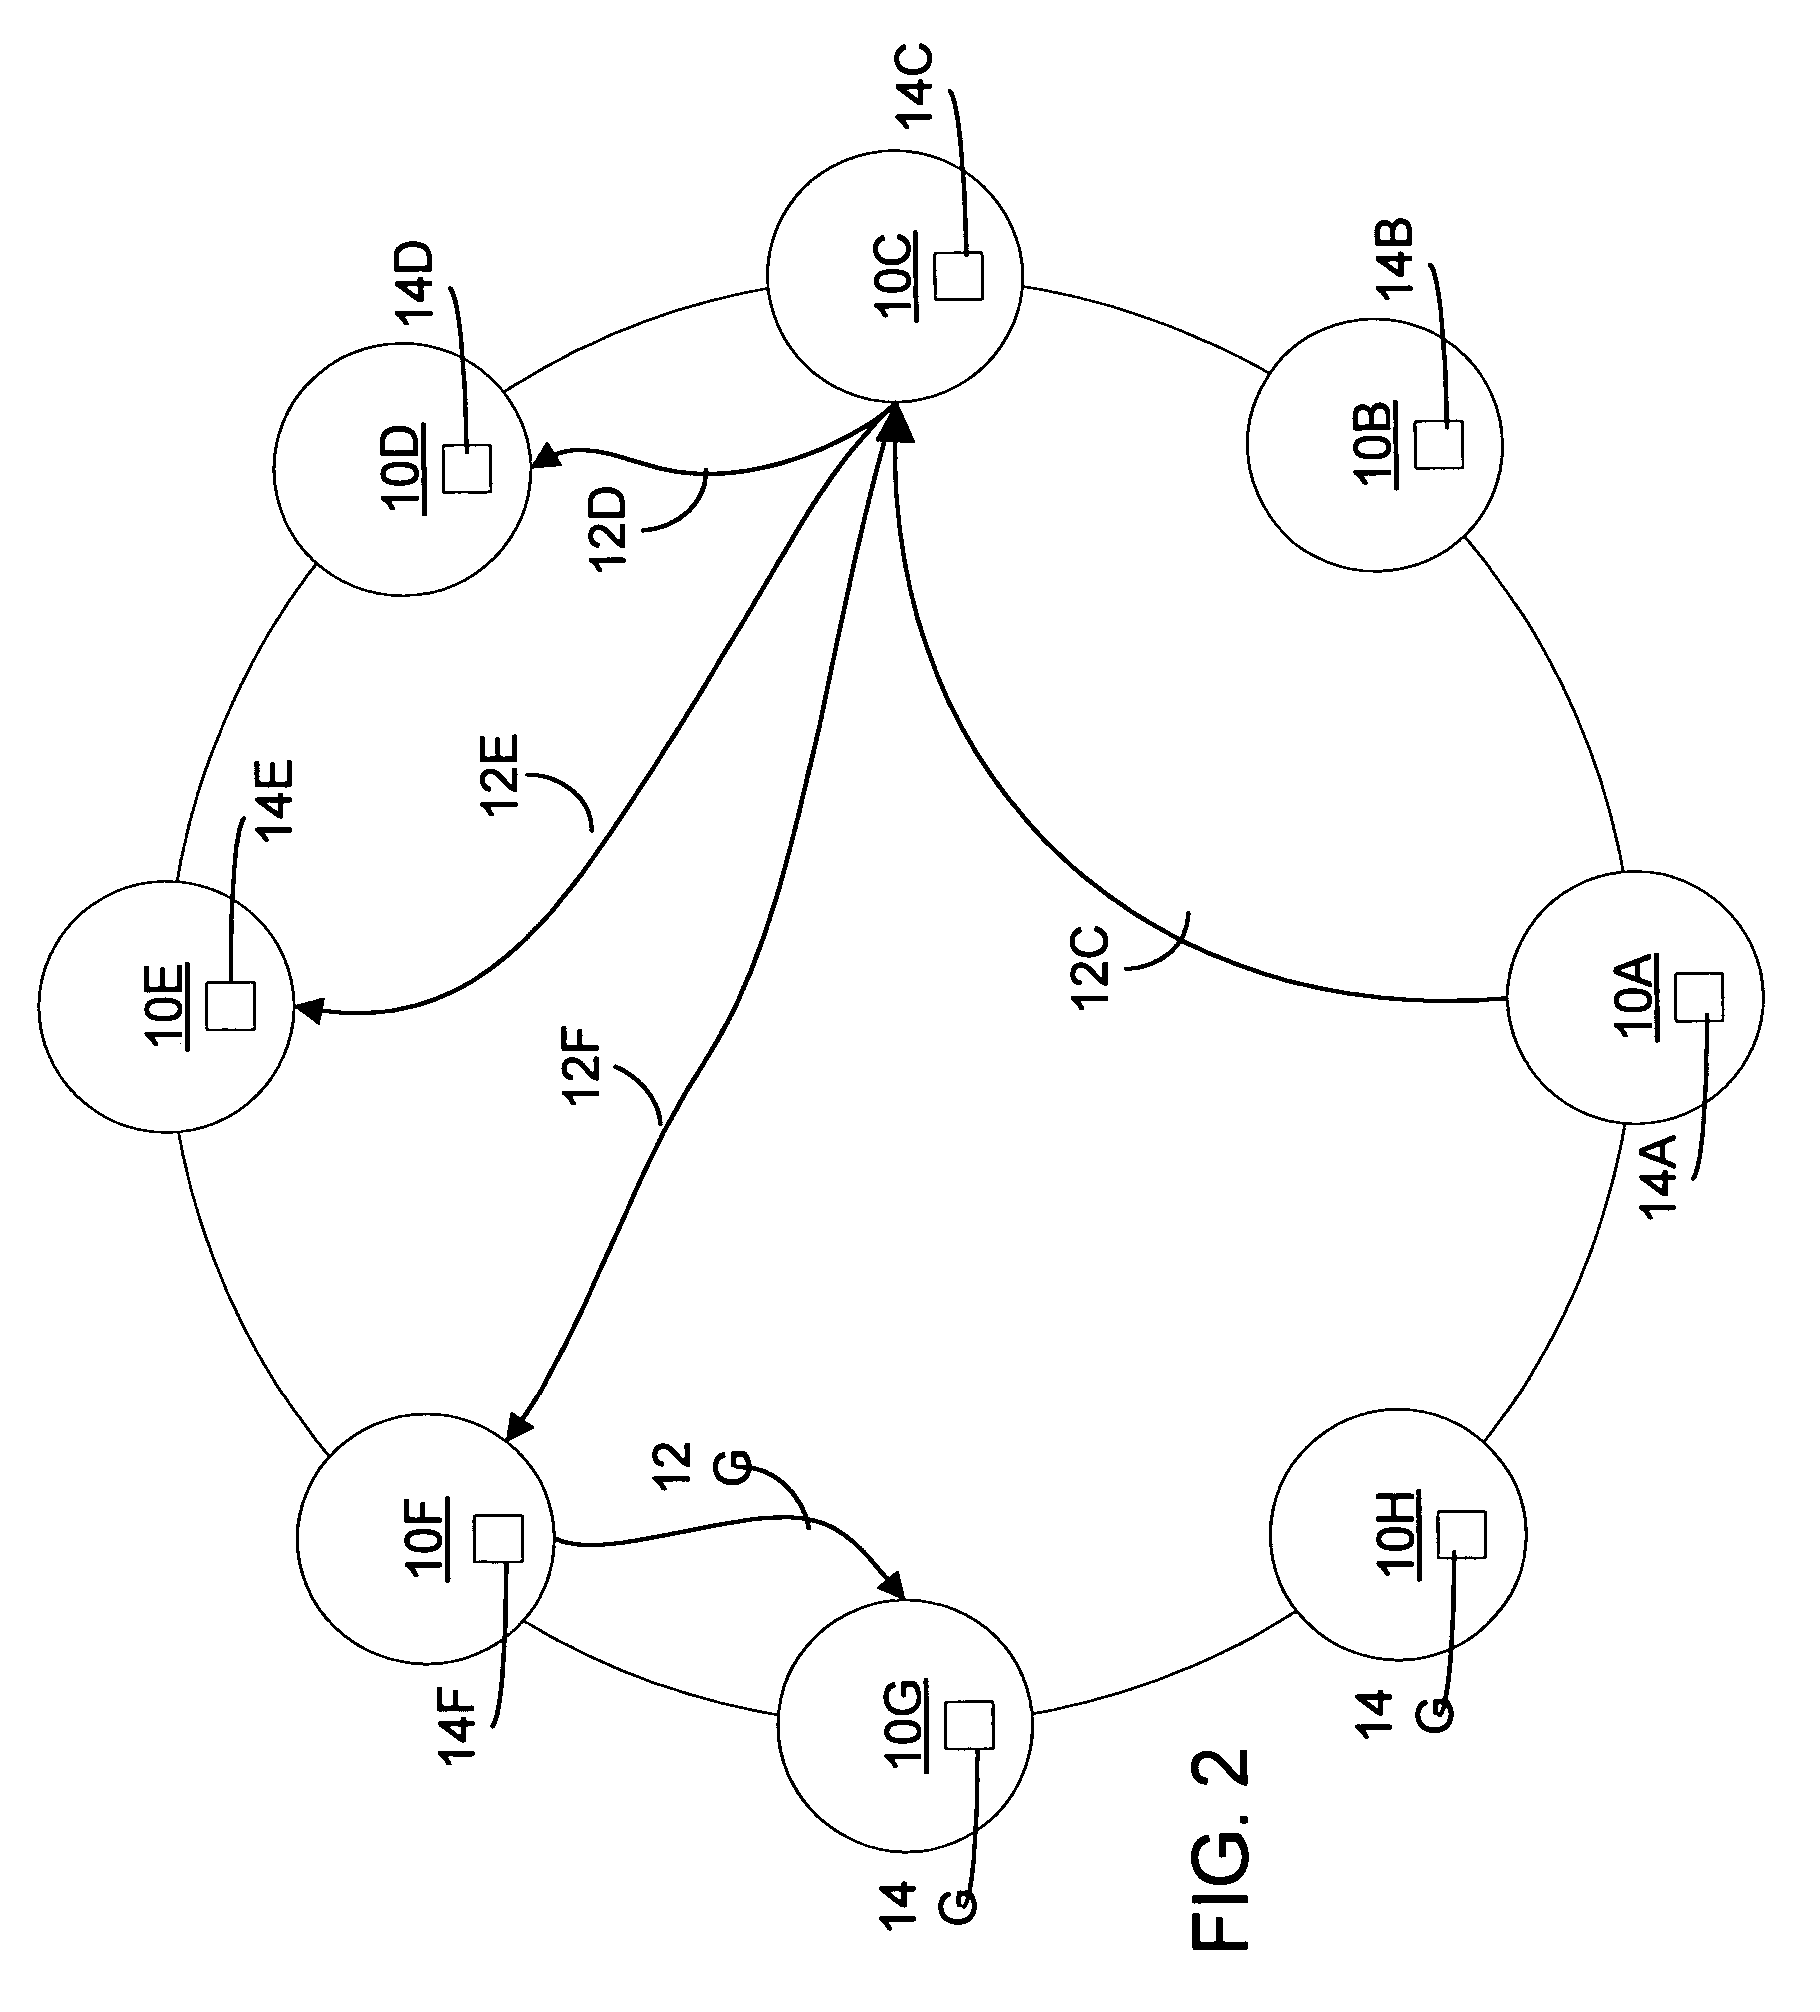 Systems and methods for providing distributed, decentralized data storage and retrieval